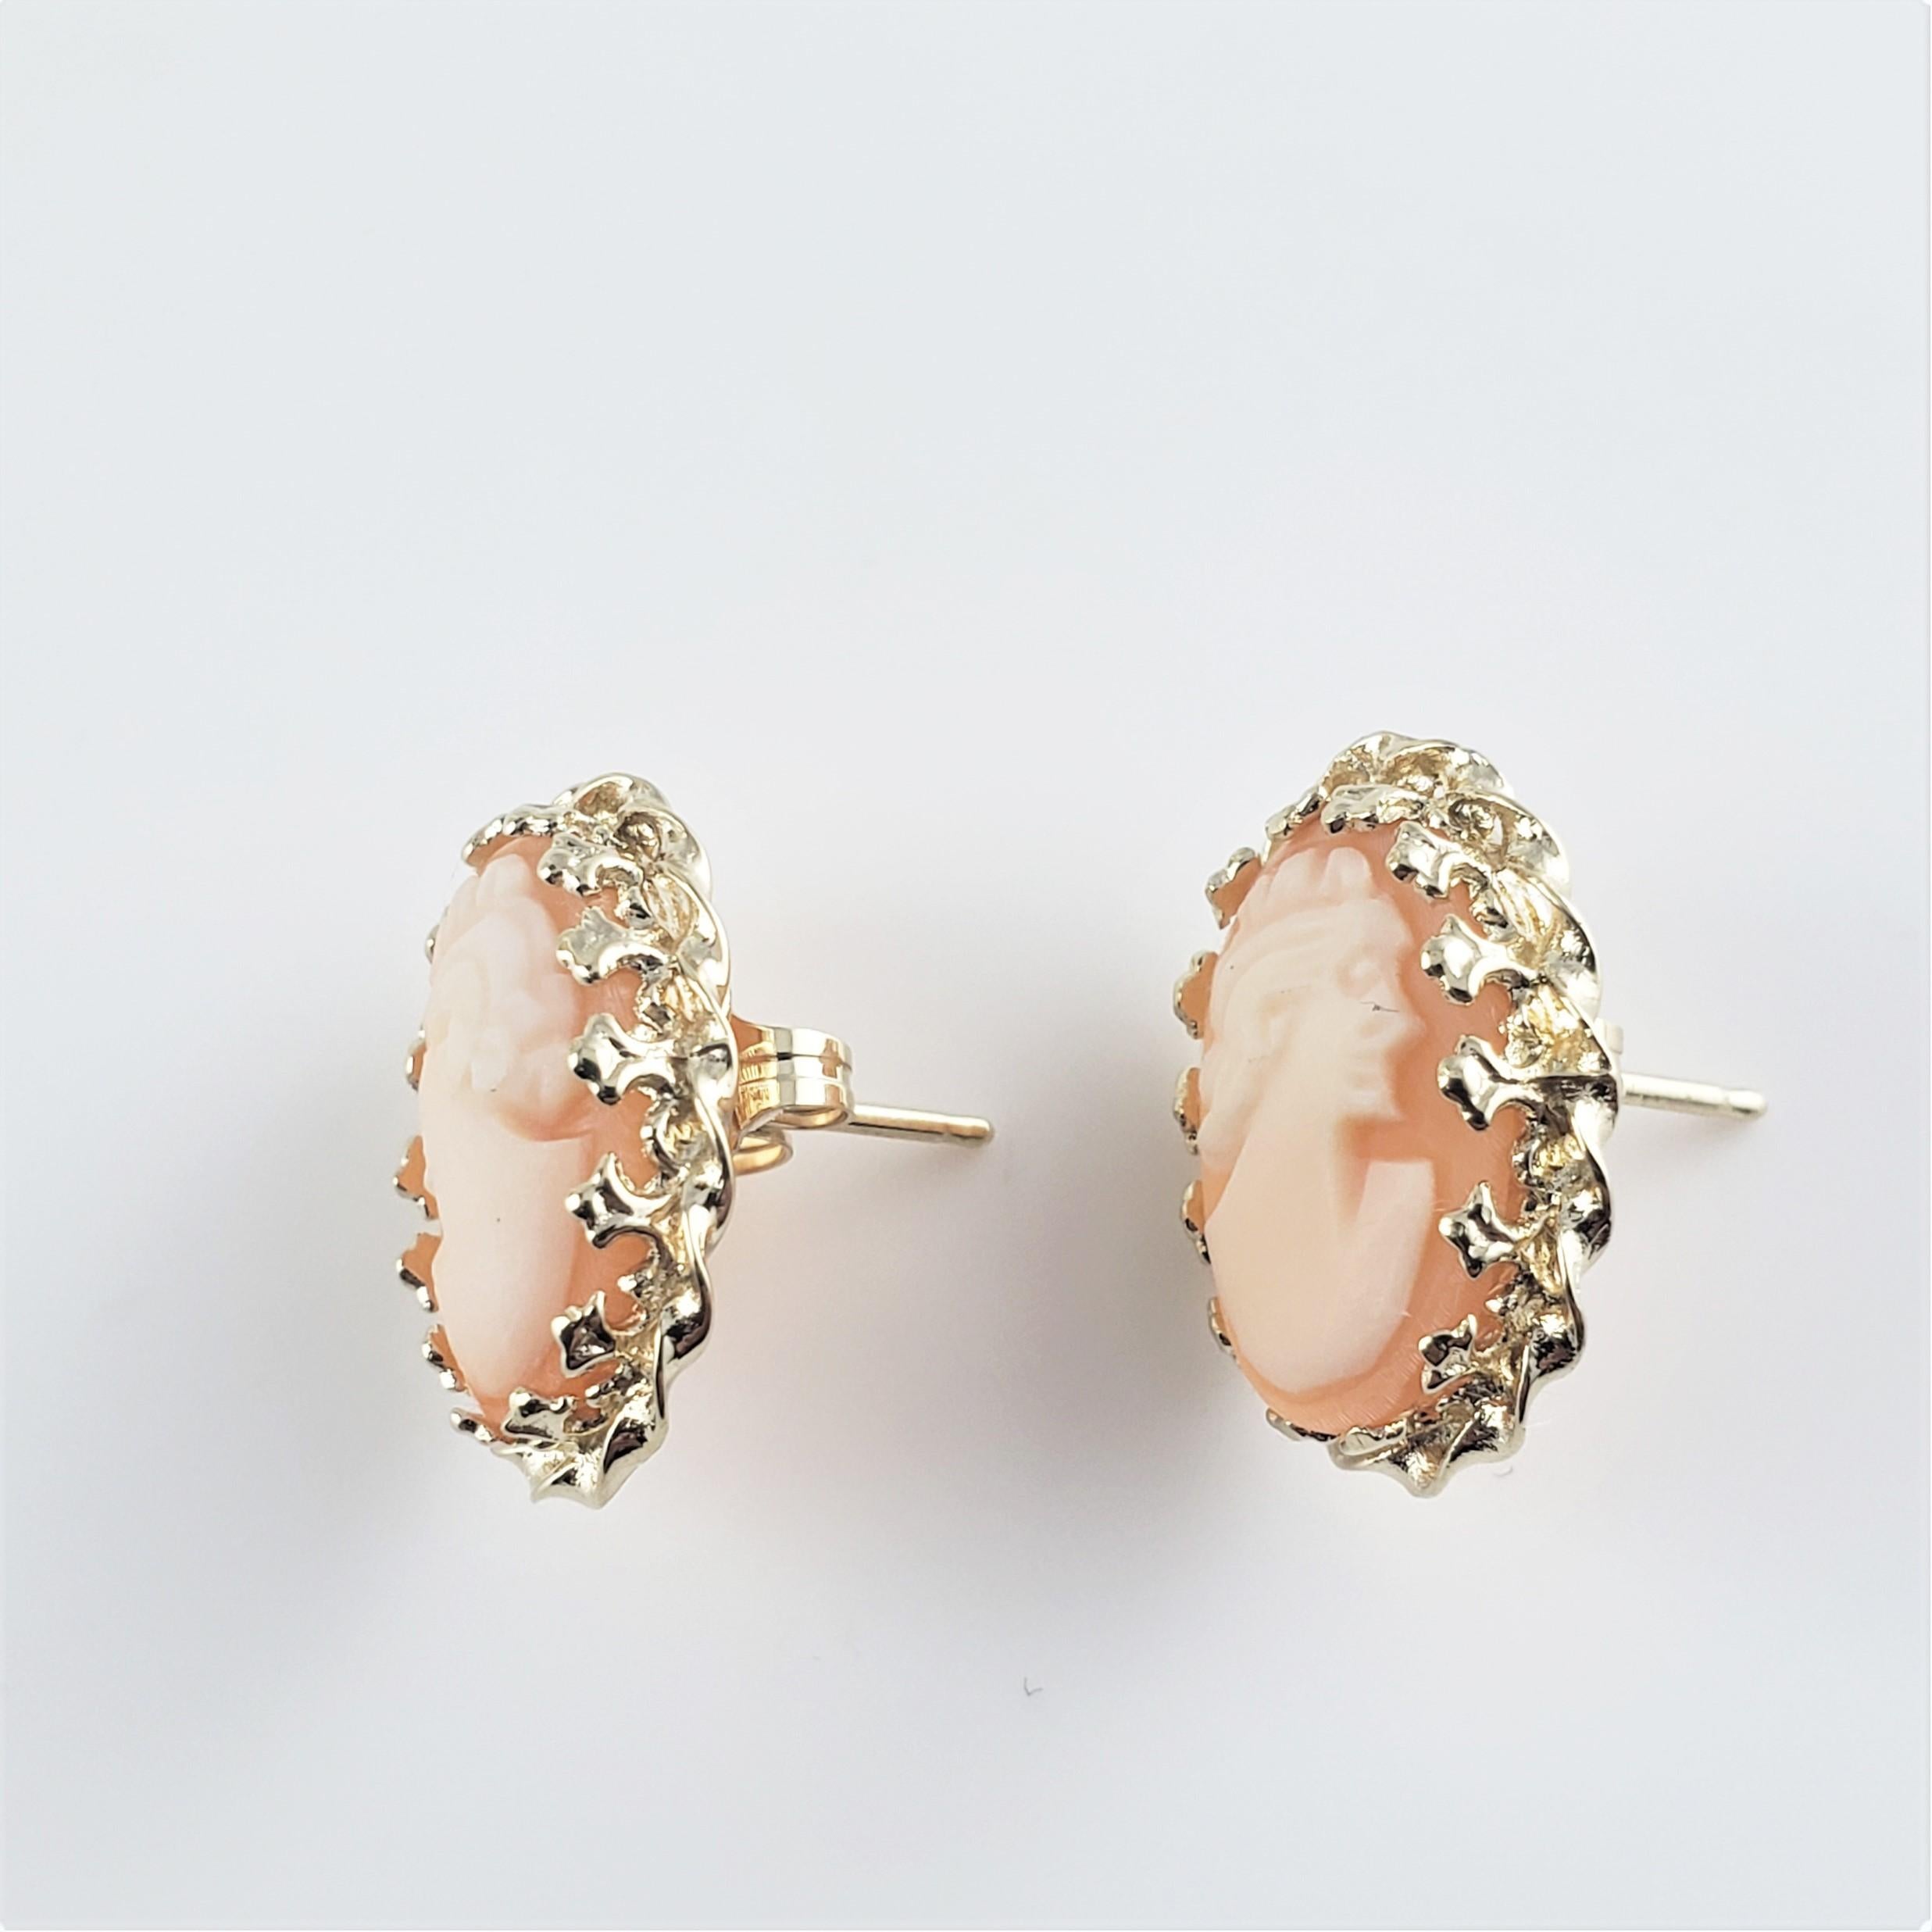 14 Karat Yellow Gold Cameo Earrings-

These lovely cameo earrings each feature a lovely lady in profile set in beautifully detailed 14K yellow gold.  Push back closures.

Size:  17 mm x14  mm

Weight:  2.6 dwt. /  4.1 gr.

Stamped: 14K

Very good